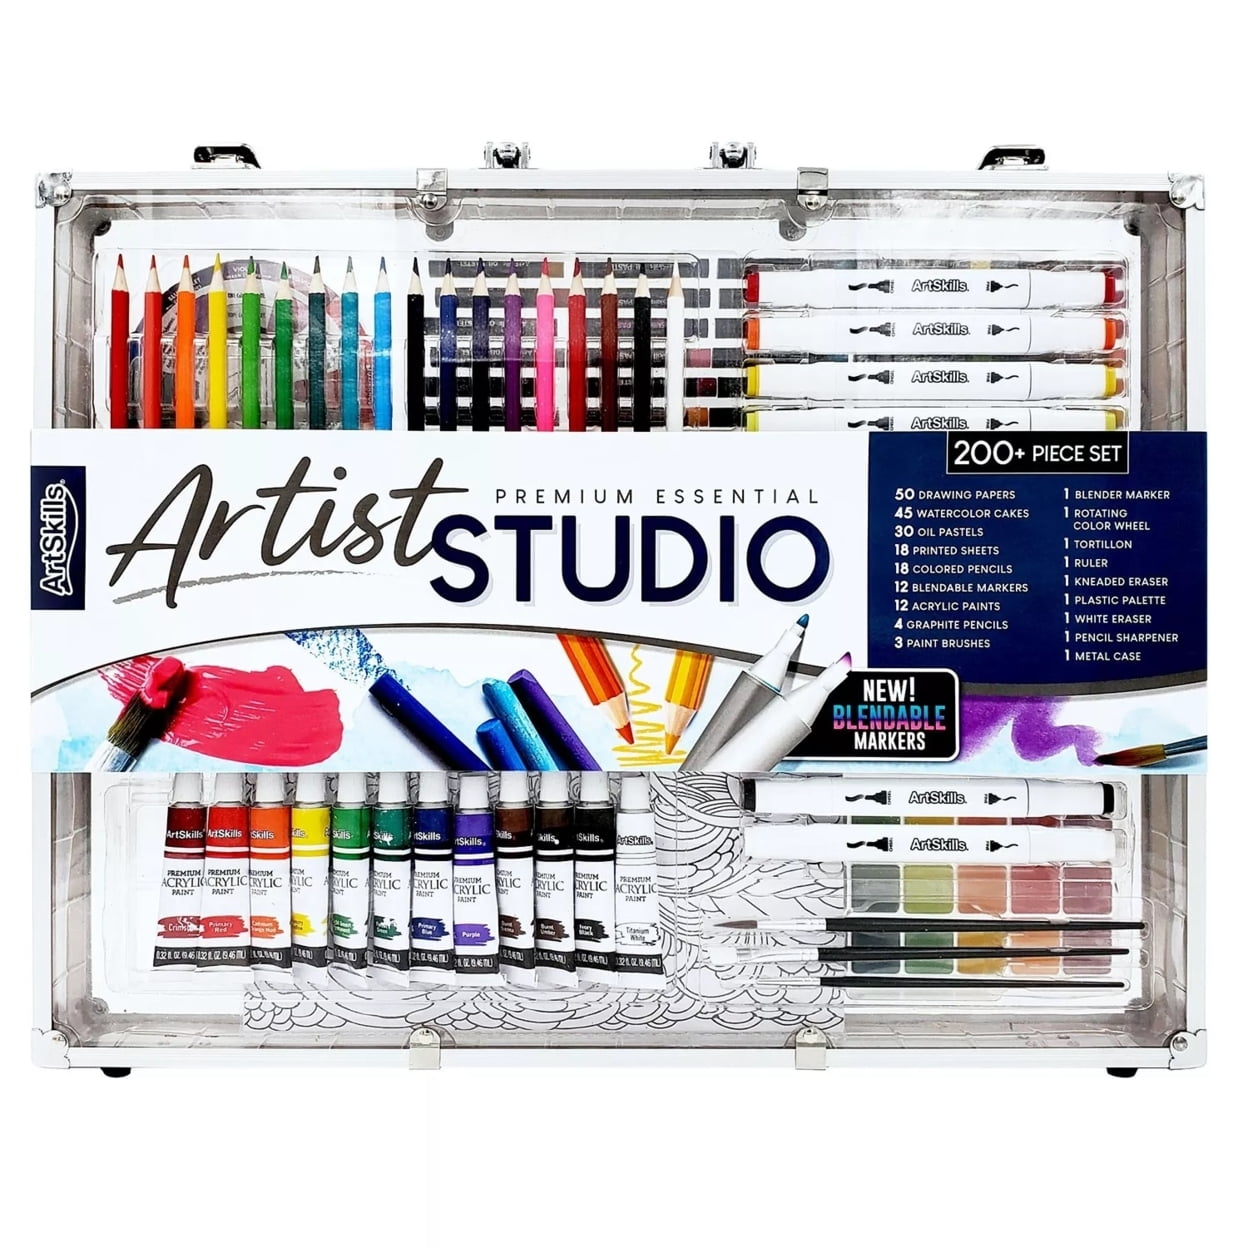 Ultimate List of Art Supplies for Your Creative Teen - Masterpiece Society